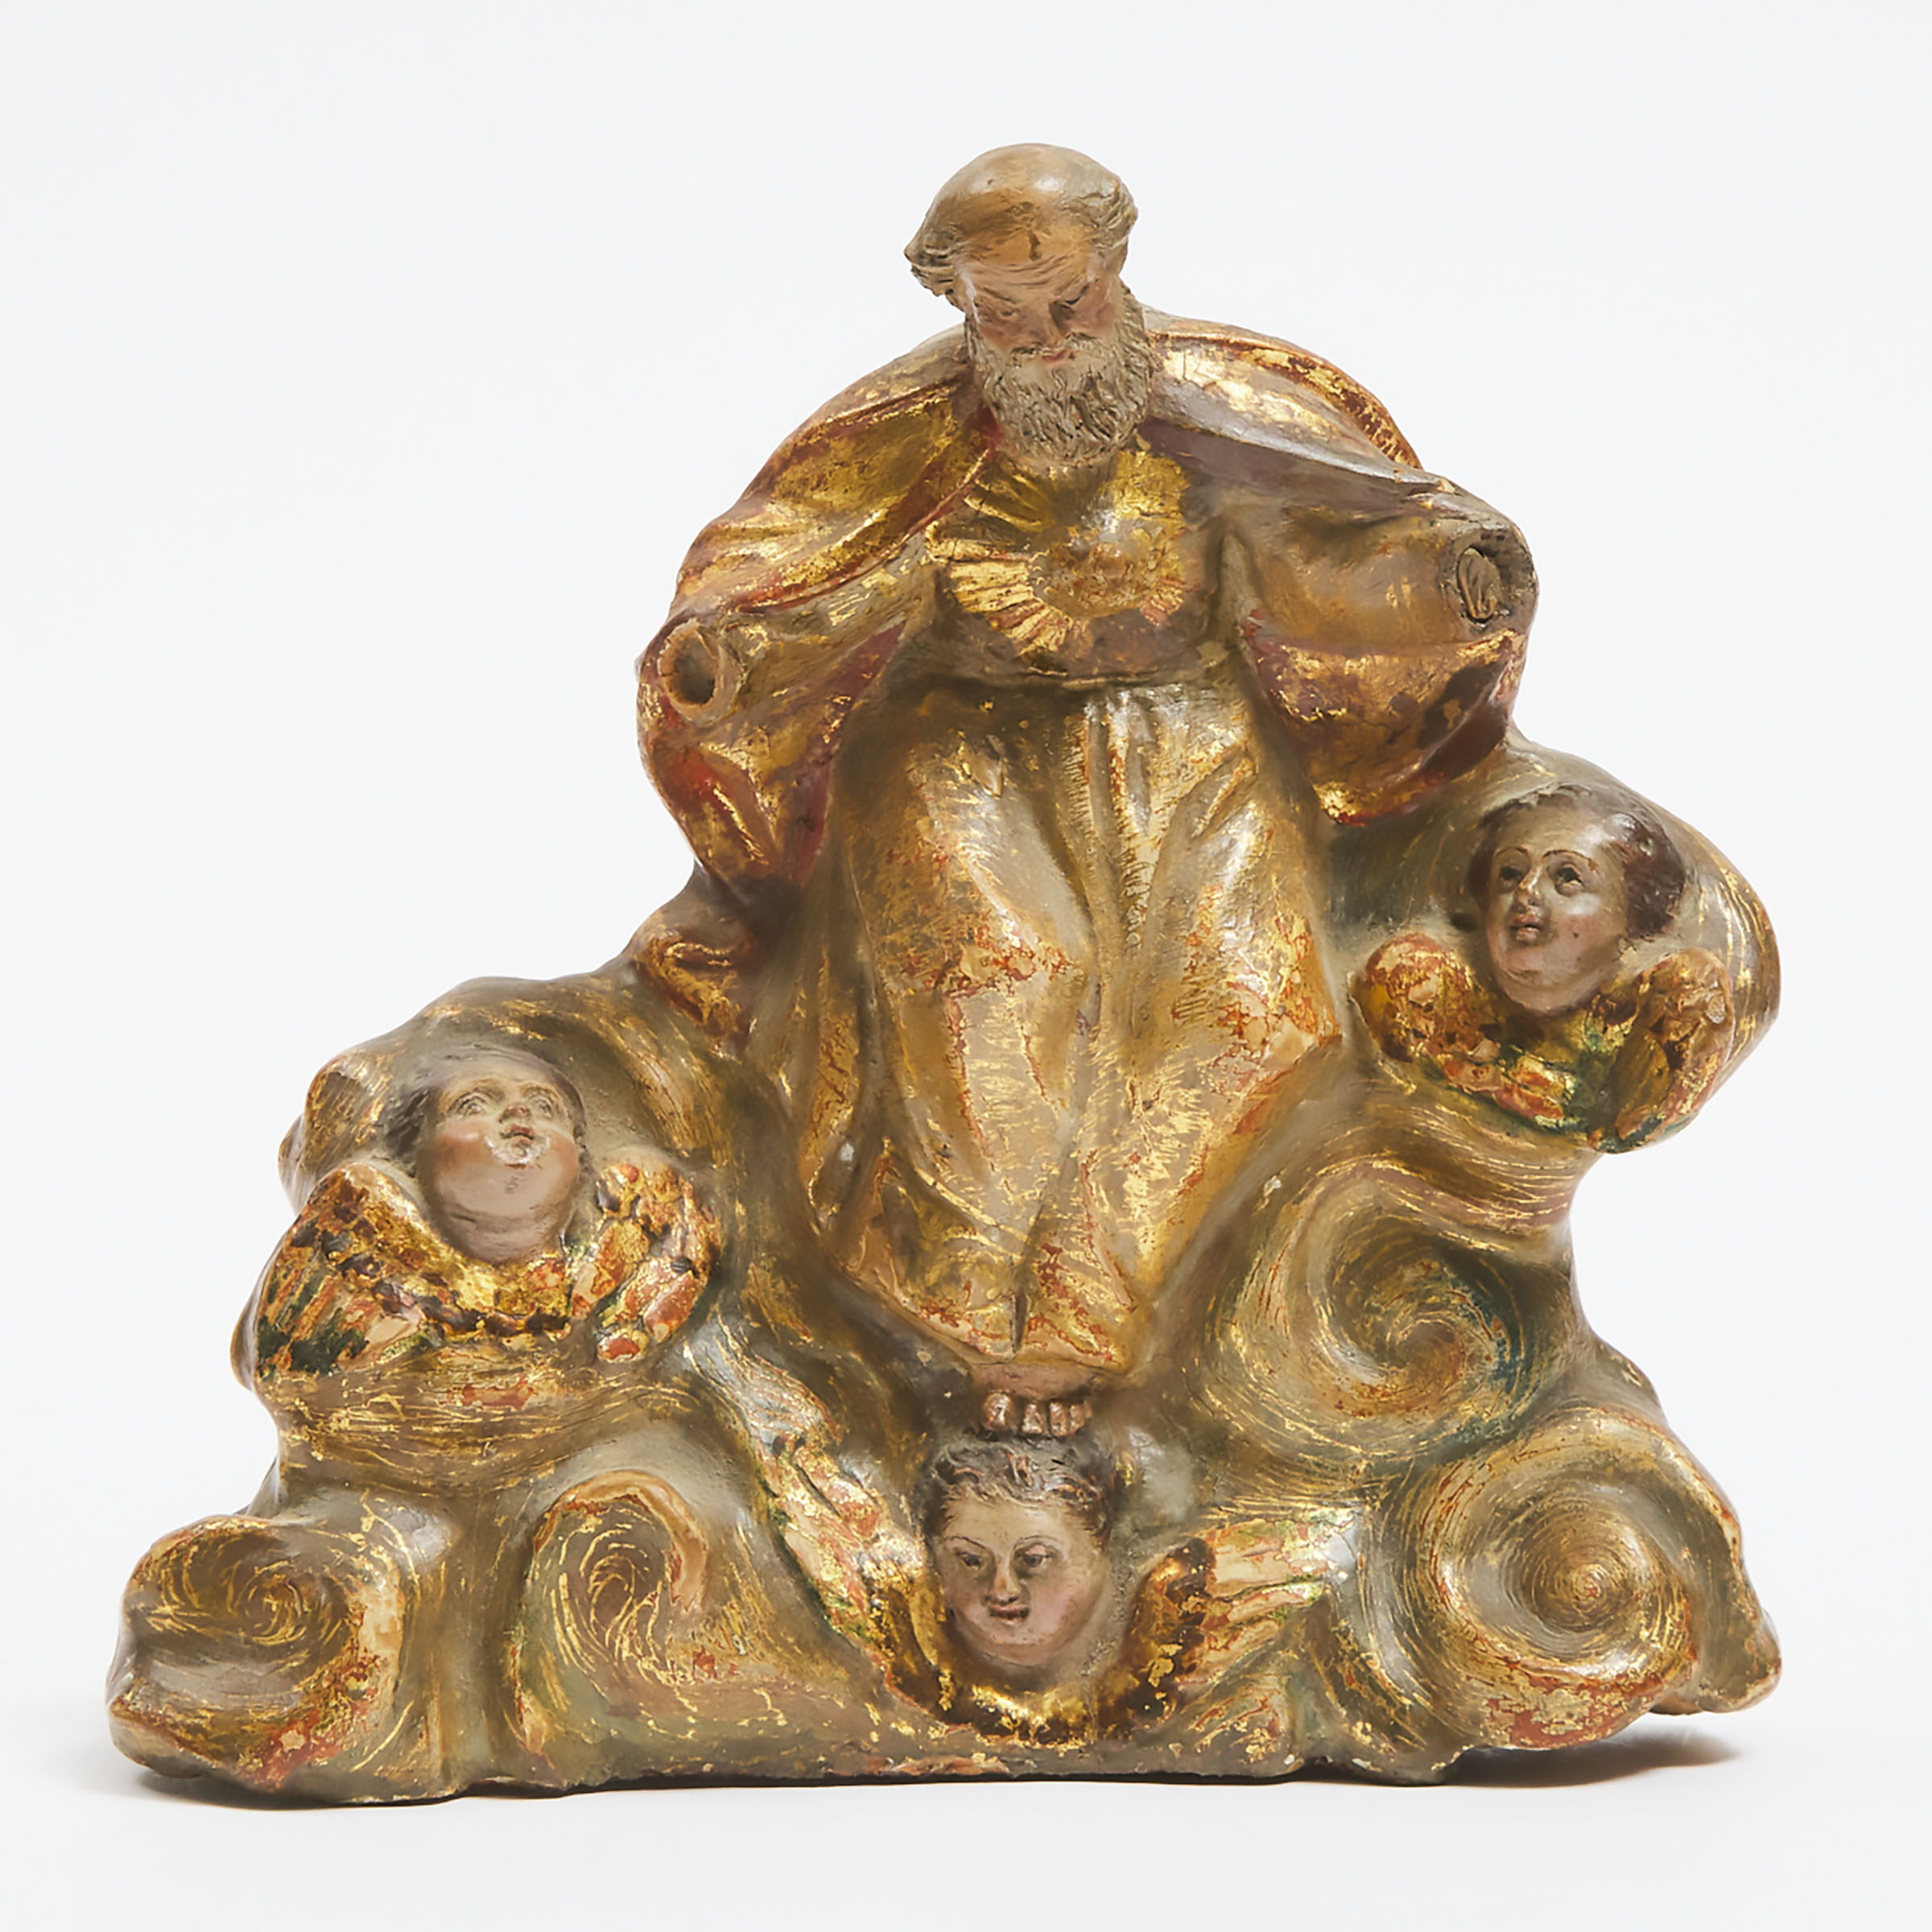 Italian Polychromed and Parcel Gilt Terra Cotta Group of God the Father Amongst Clouds and Cherubs, 19th/early 20th century